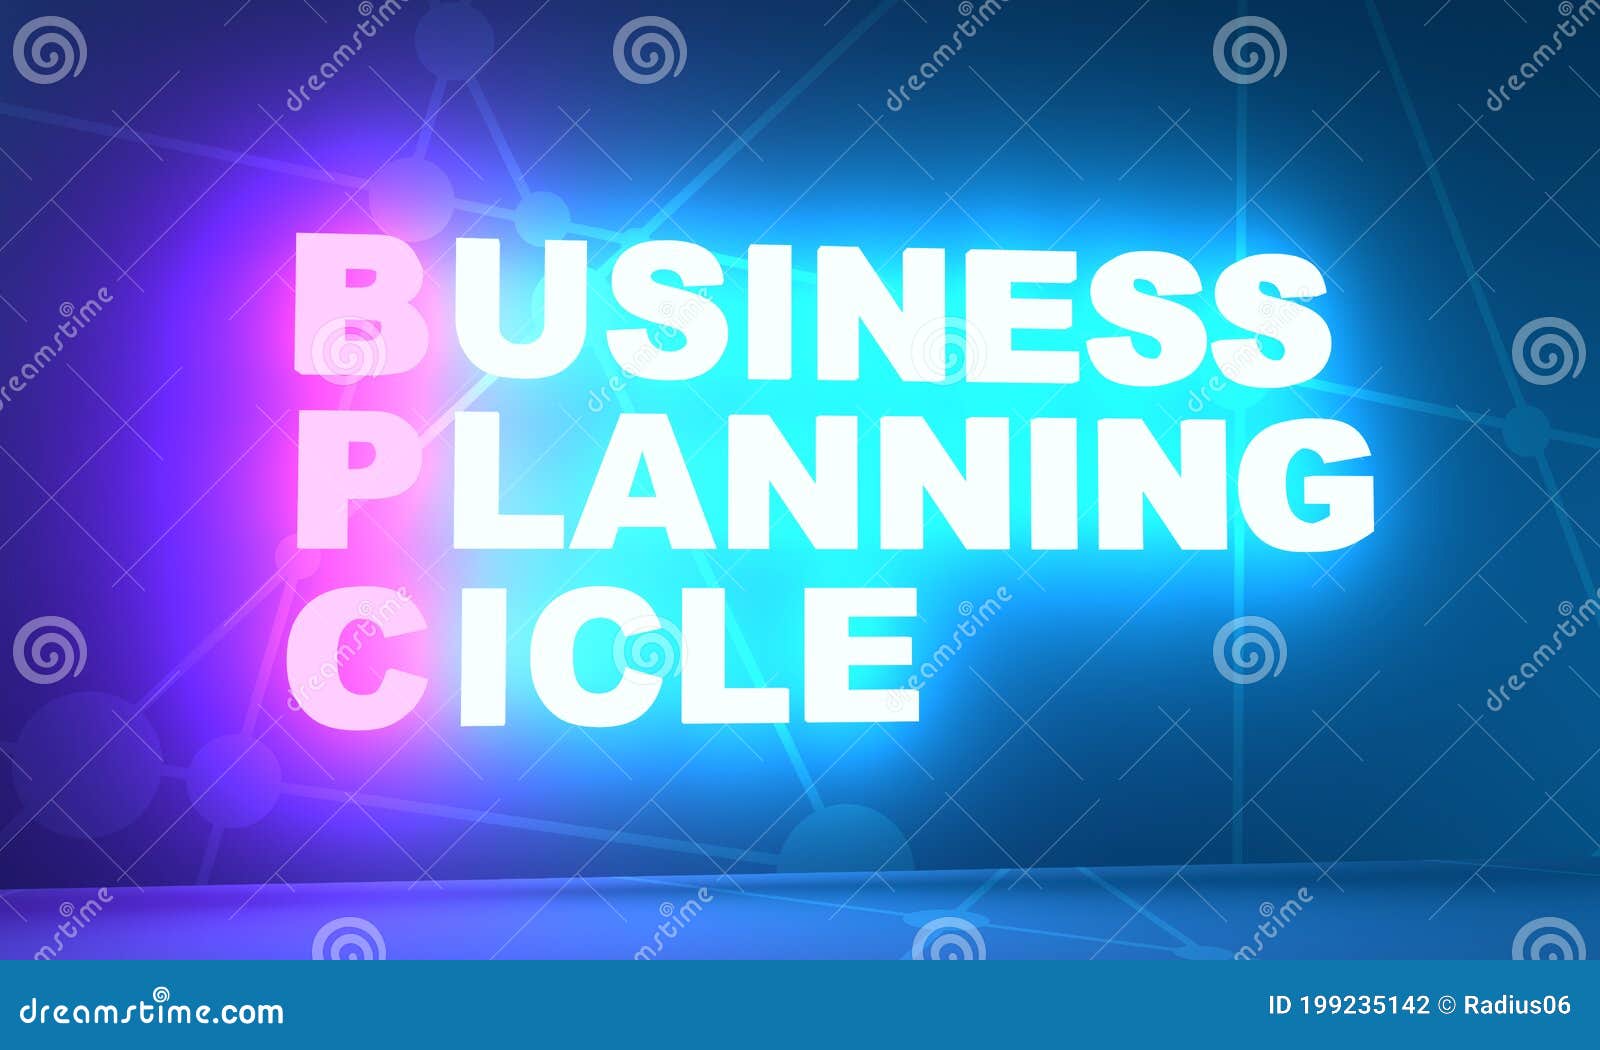 business planning cicle